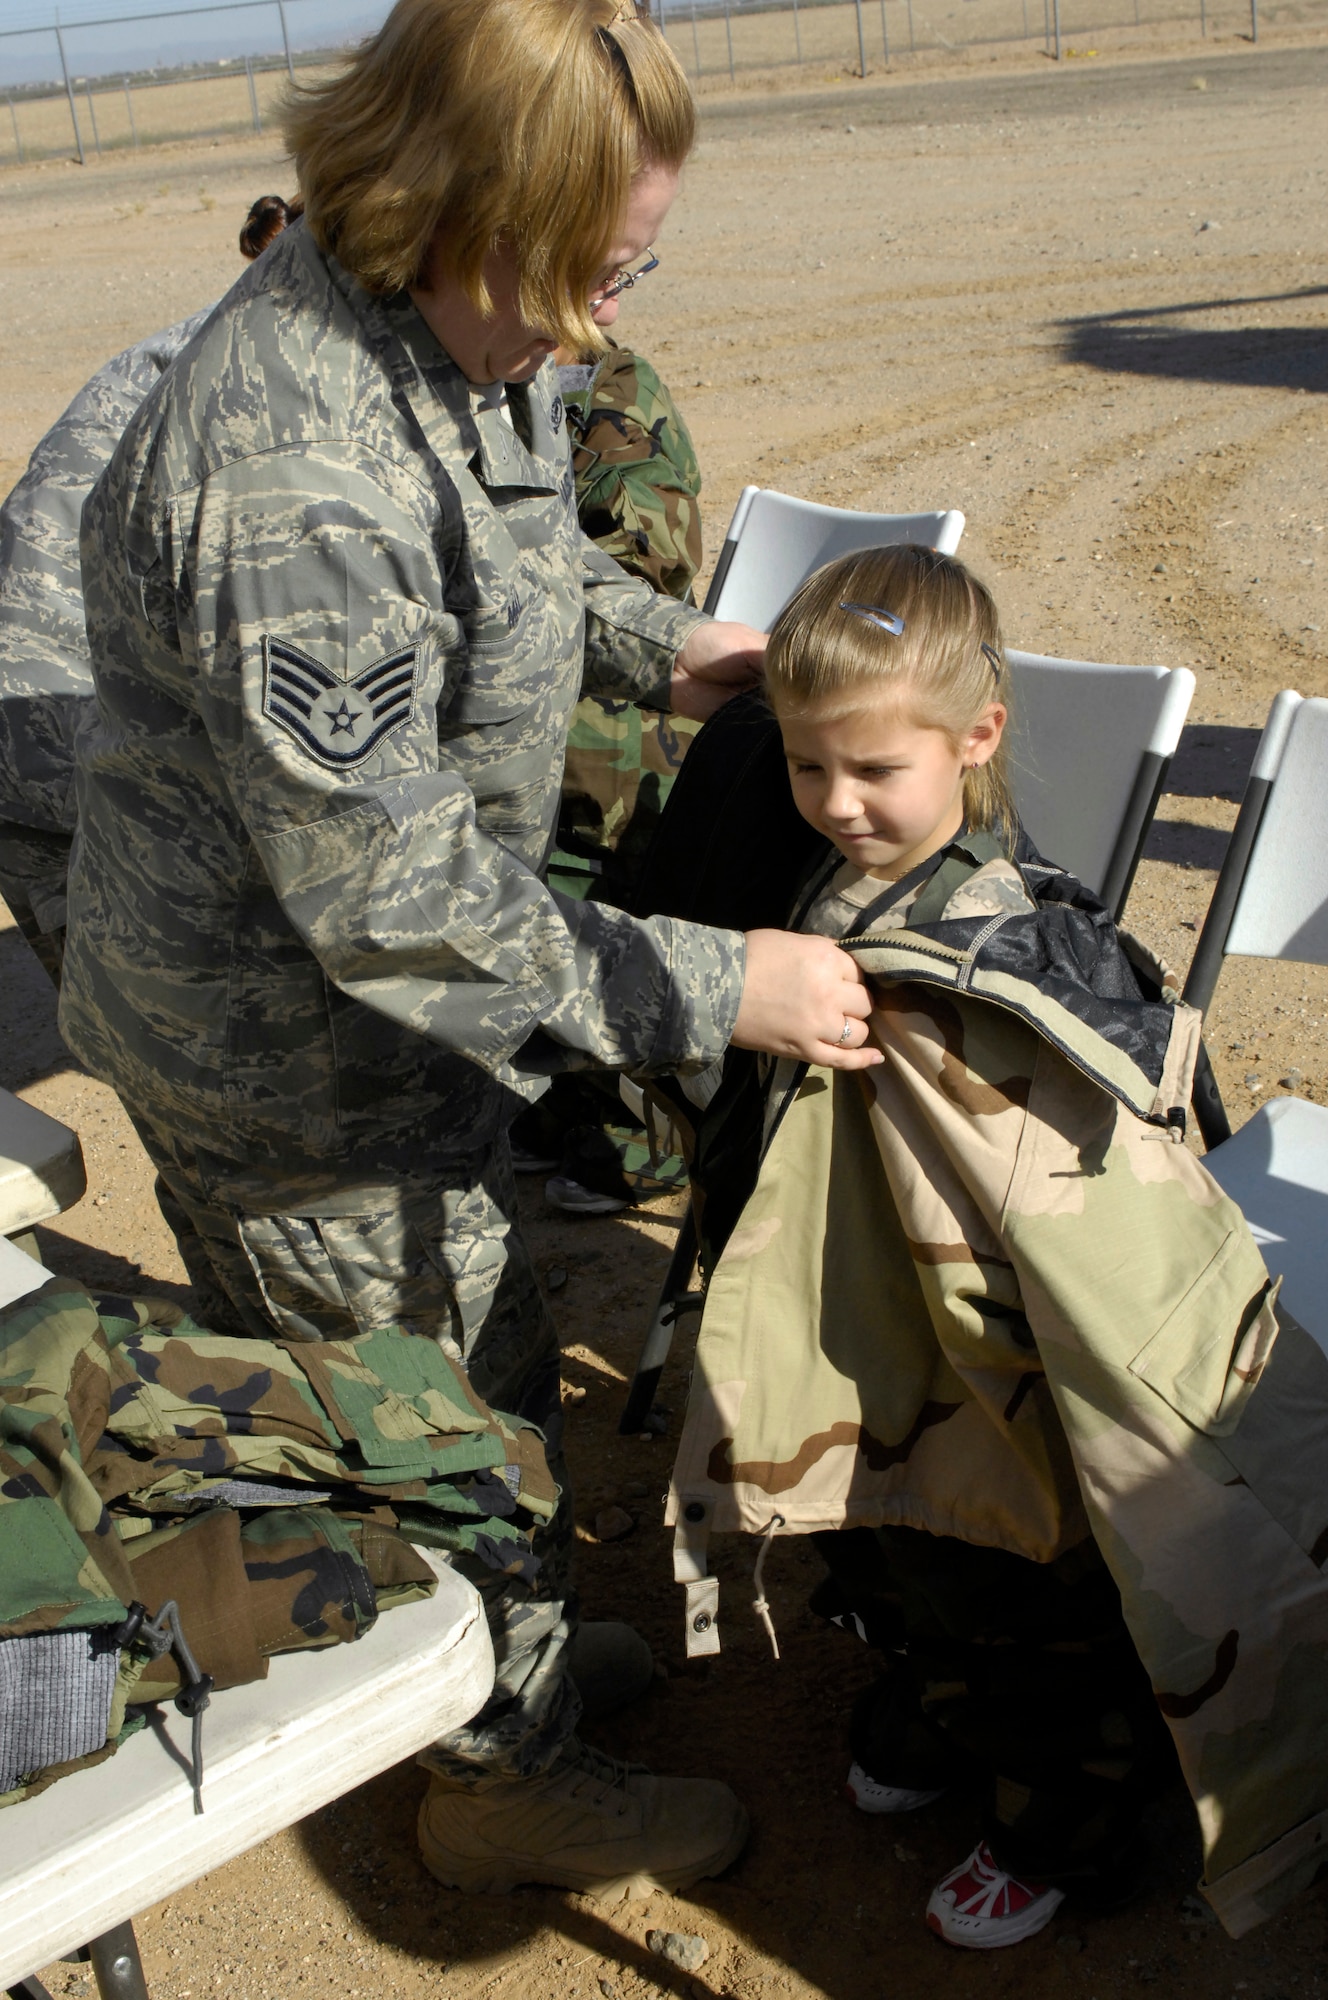 Ellie Welcott, 6, has Mission Oriented Protective Posture (MOPP) gear put on by Staff Sgt. Miranda Mal, 56th Civil Engineer Squadron emergency management, while "deployed" in support of the 2009 Operation Kids event, Oct. 24, 2009, Luke Air Force Base, Arizona. (U.S. Air Force Photo by Staff Sgt. Jason Colbert)